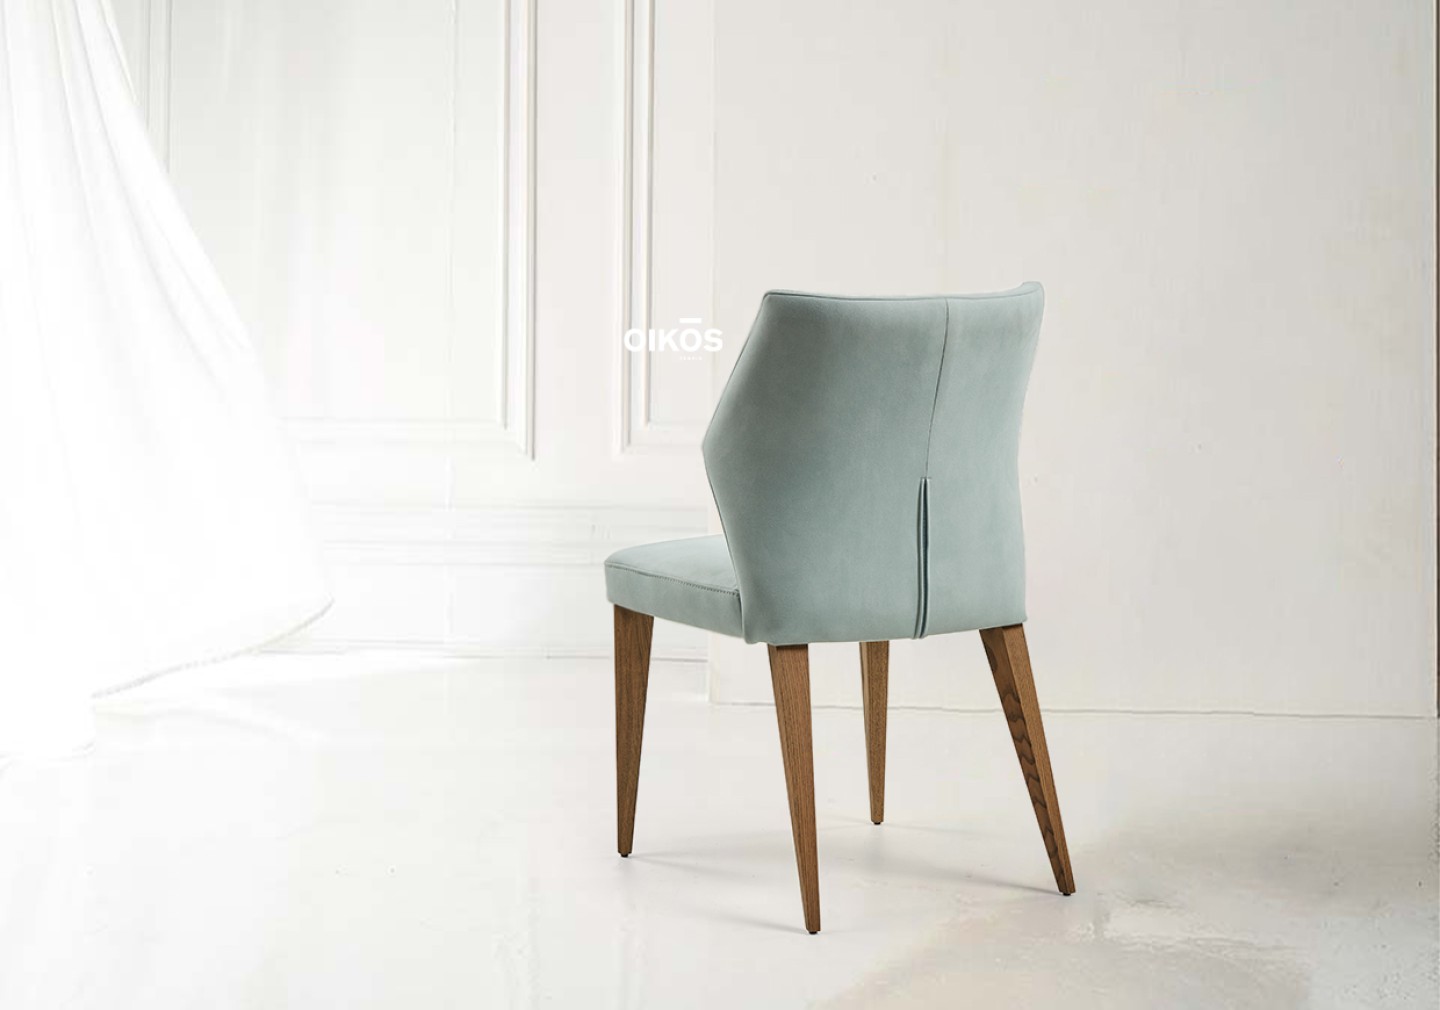 THE GISELE DINING CHAIR